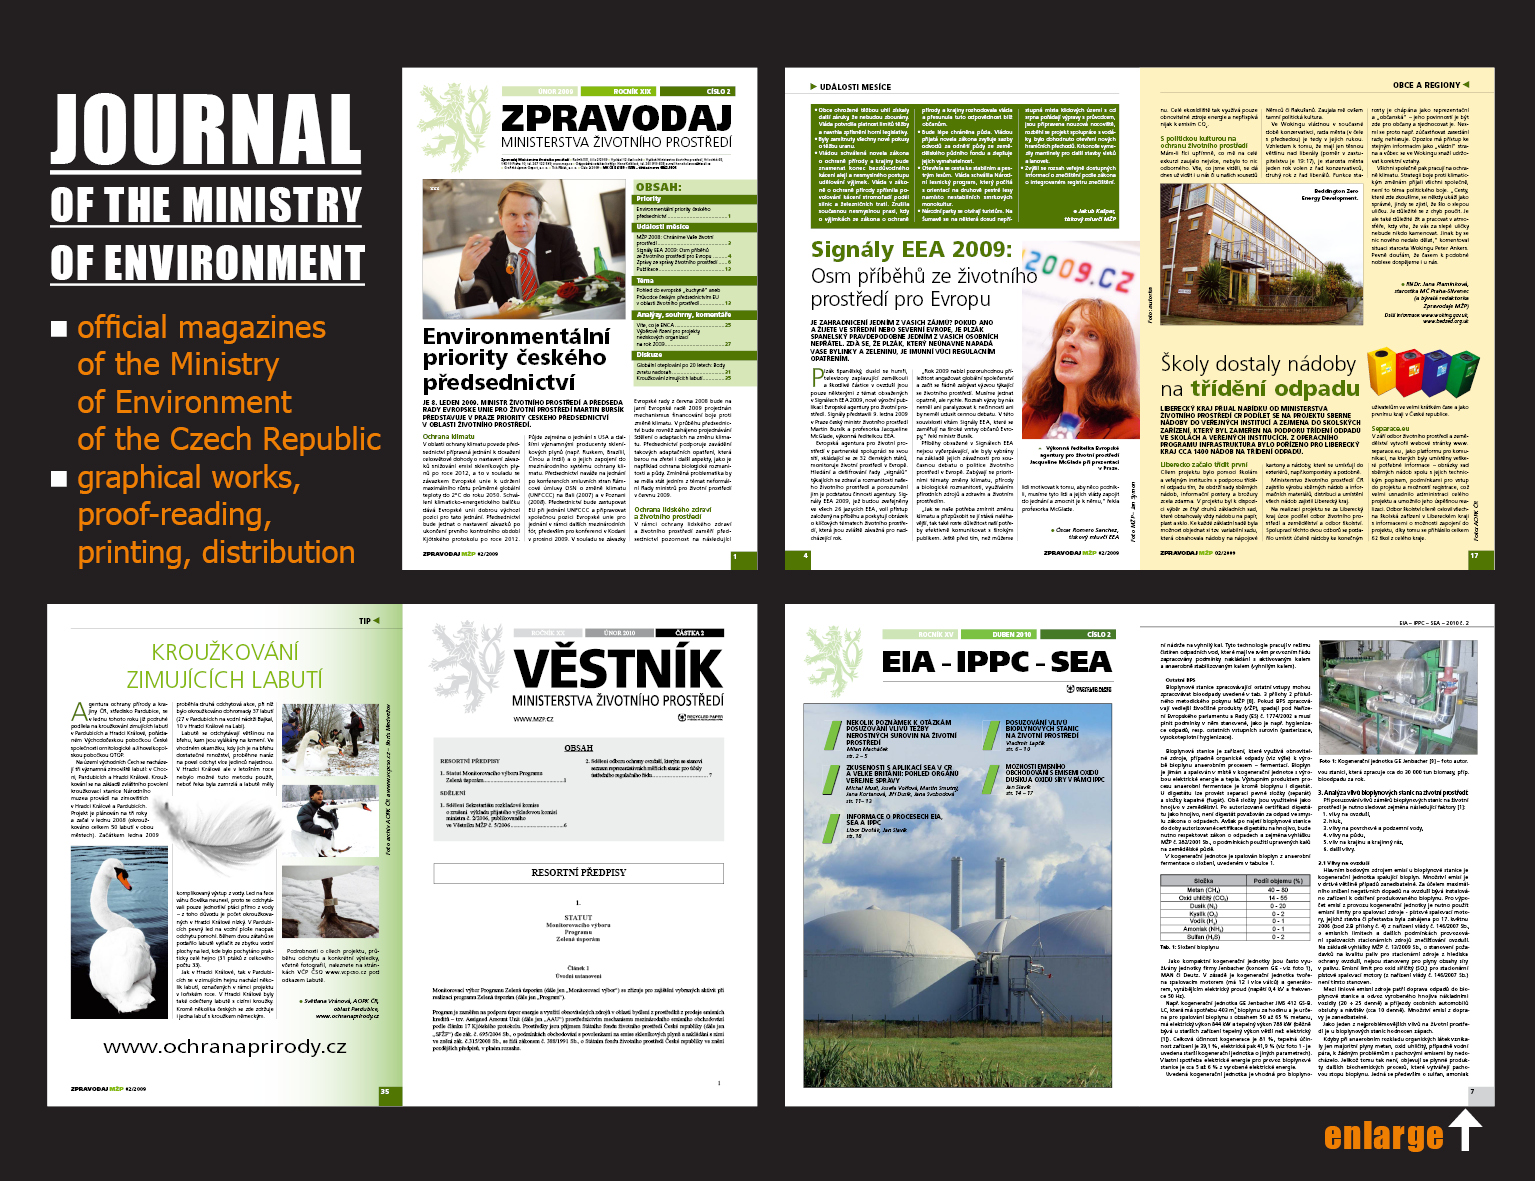 Three official magazines of the Ministry of Environment of the Czech Republic